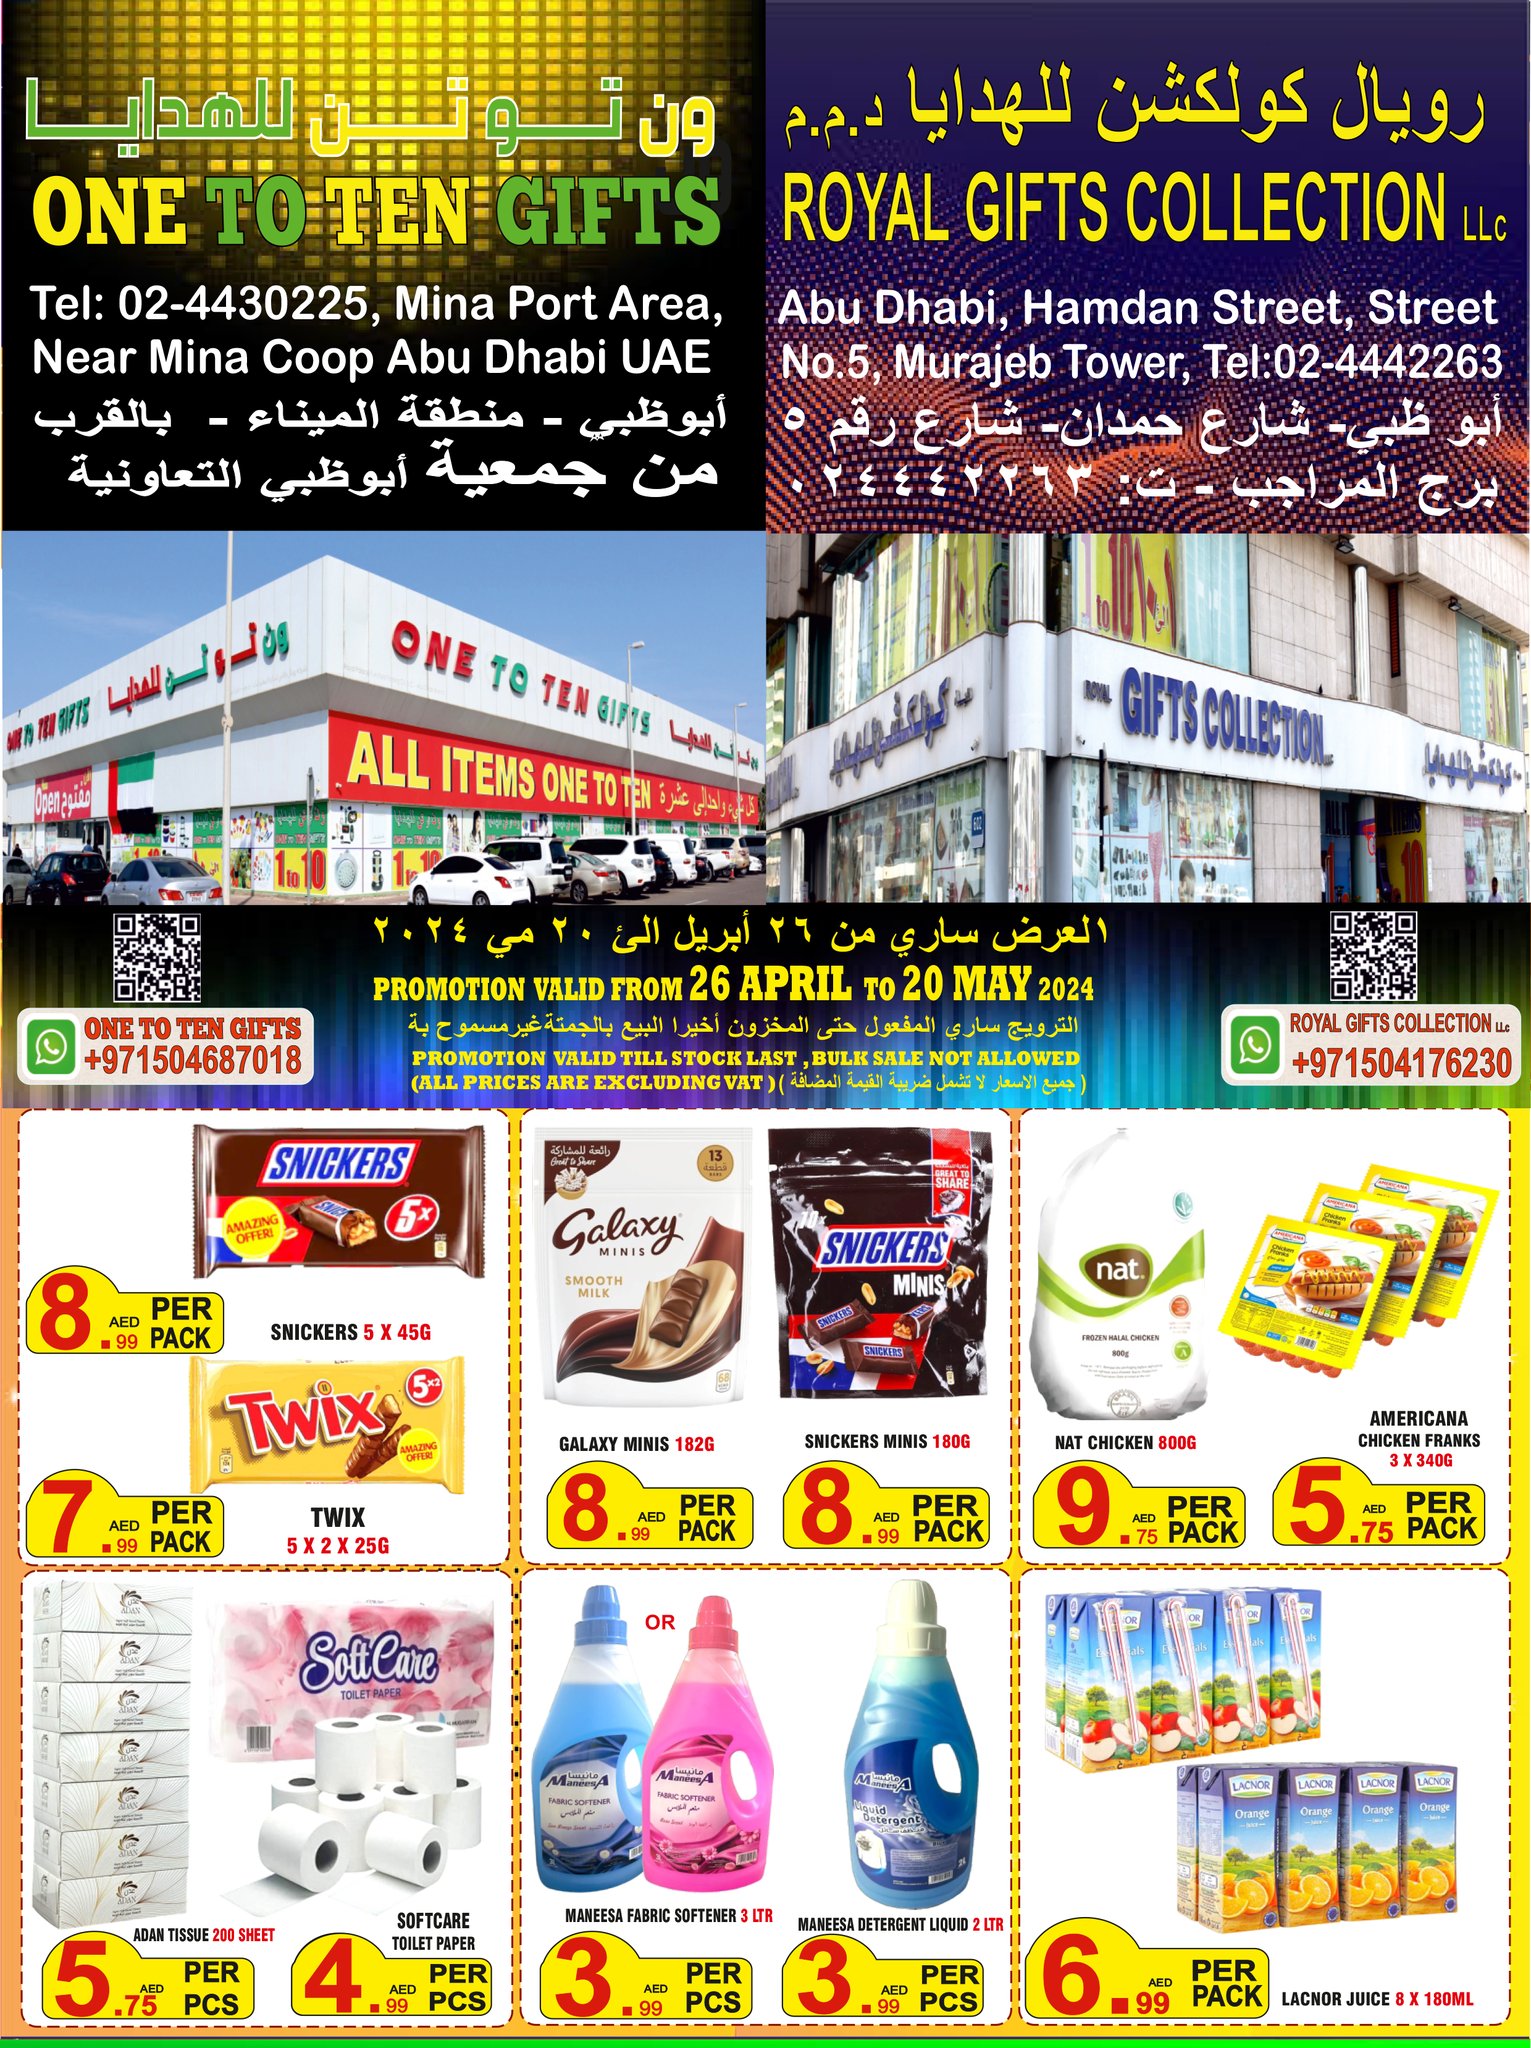 ROYAL GIFTS COLLECTION OFFERS & ONE TO TEN GIFTS LATEST OFFERS